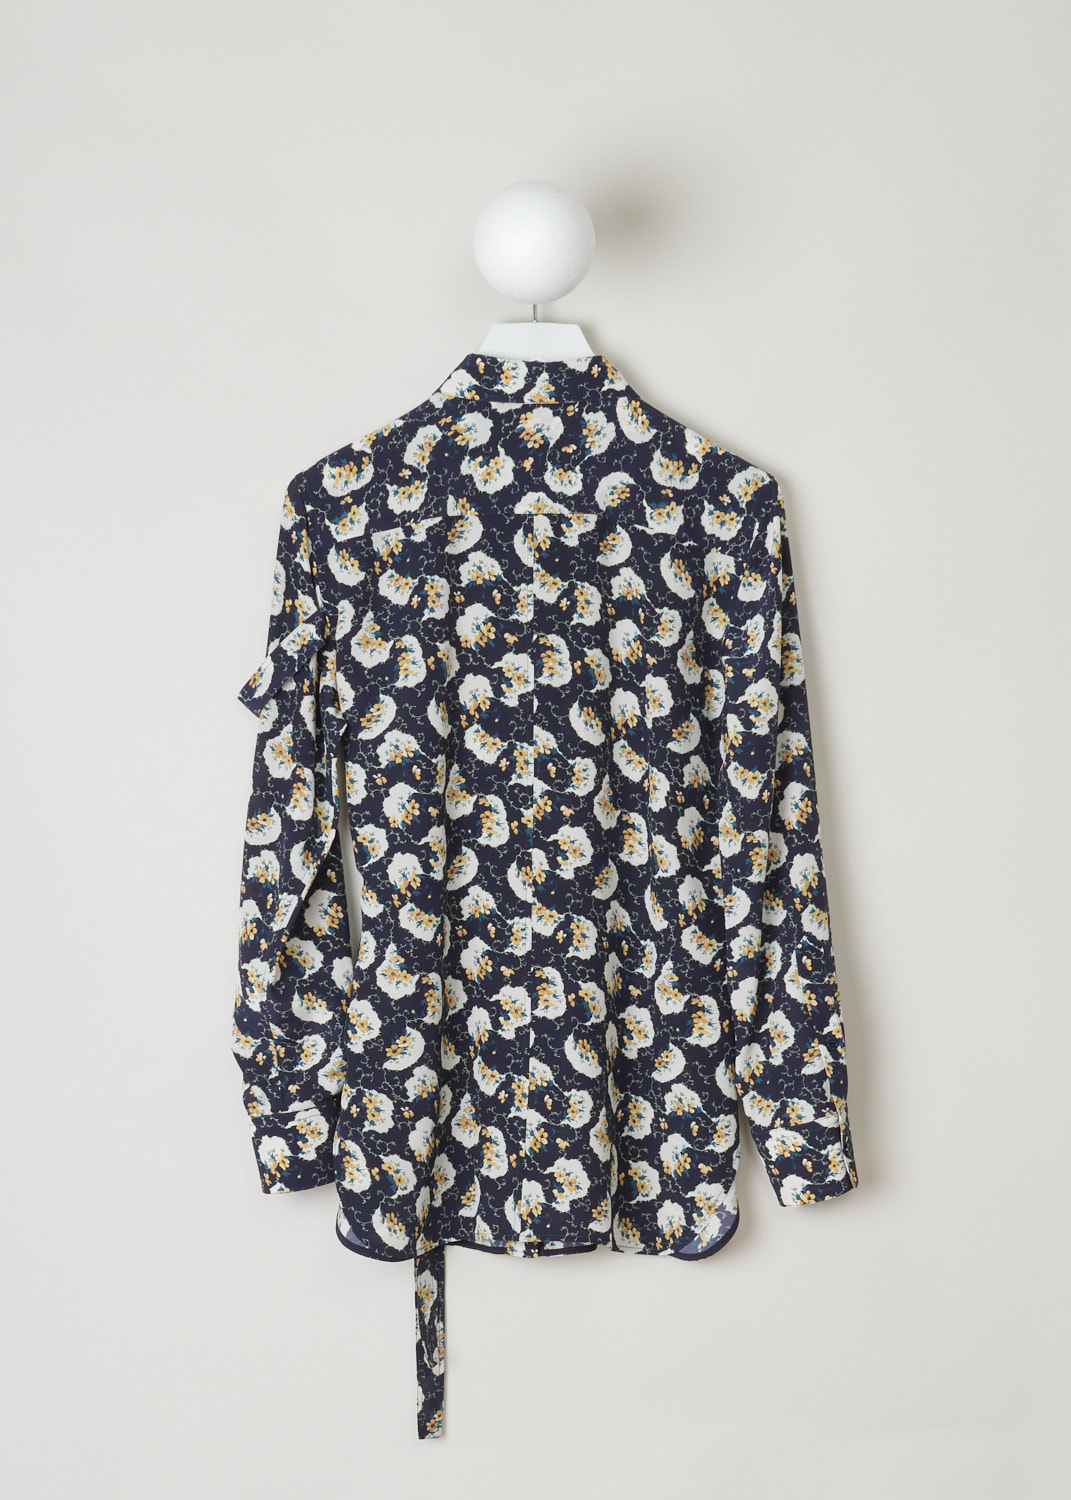 Chloé, Navy blouse decorated with a colorful floral pattern, CHC20SHT40335476_476_dark_night_blue, blue, print, back, A silk crepe blouse adorned with a floral pattern in cream, yellow and green. Featuring a pointed collar which is accompanied by self-tie detail. a similar self-tie feature can be found on waist height and adds more excitement to this blouse. The fastening option here are the concealed buttons on the front.  